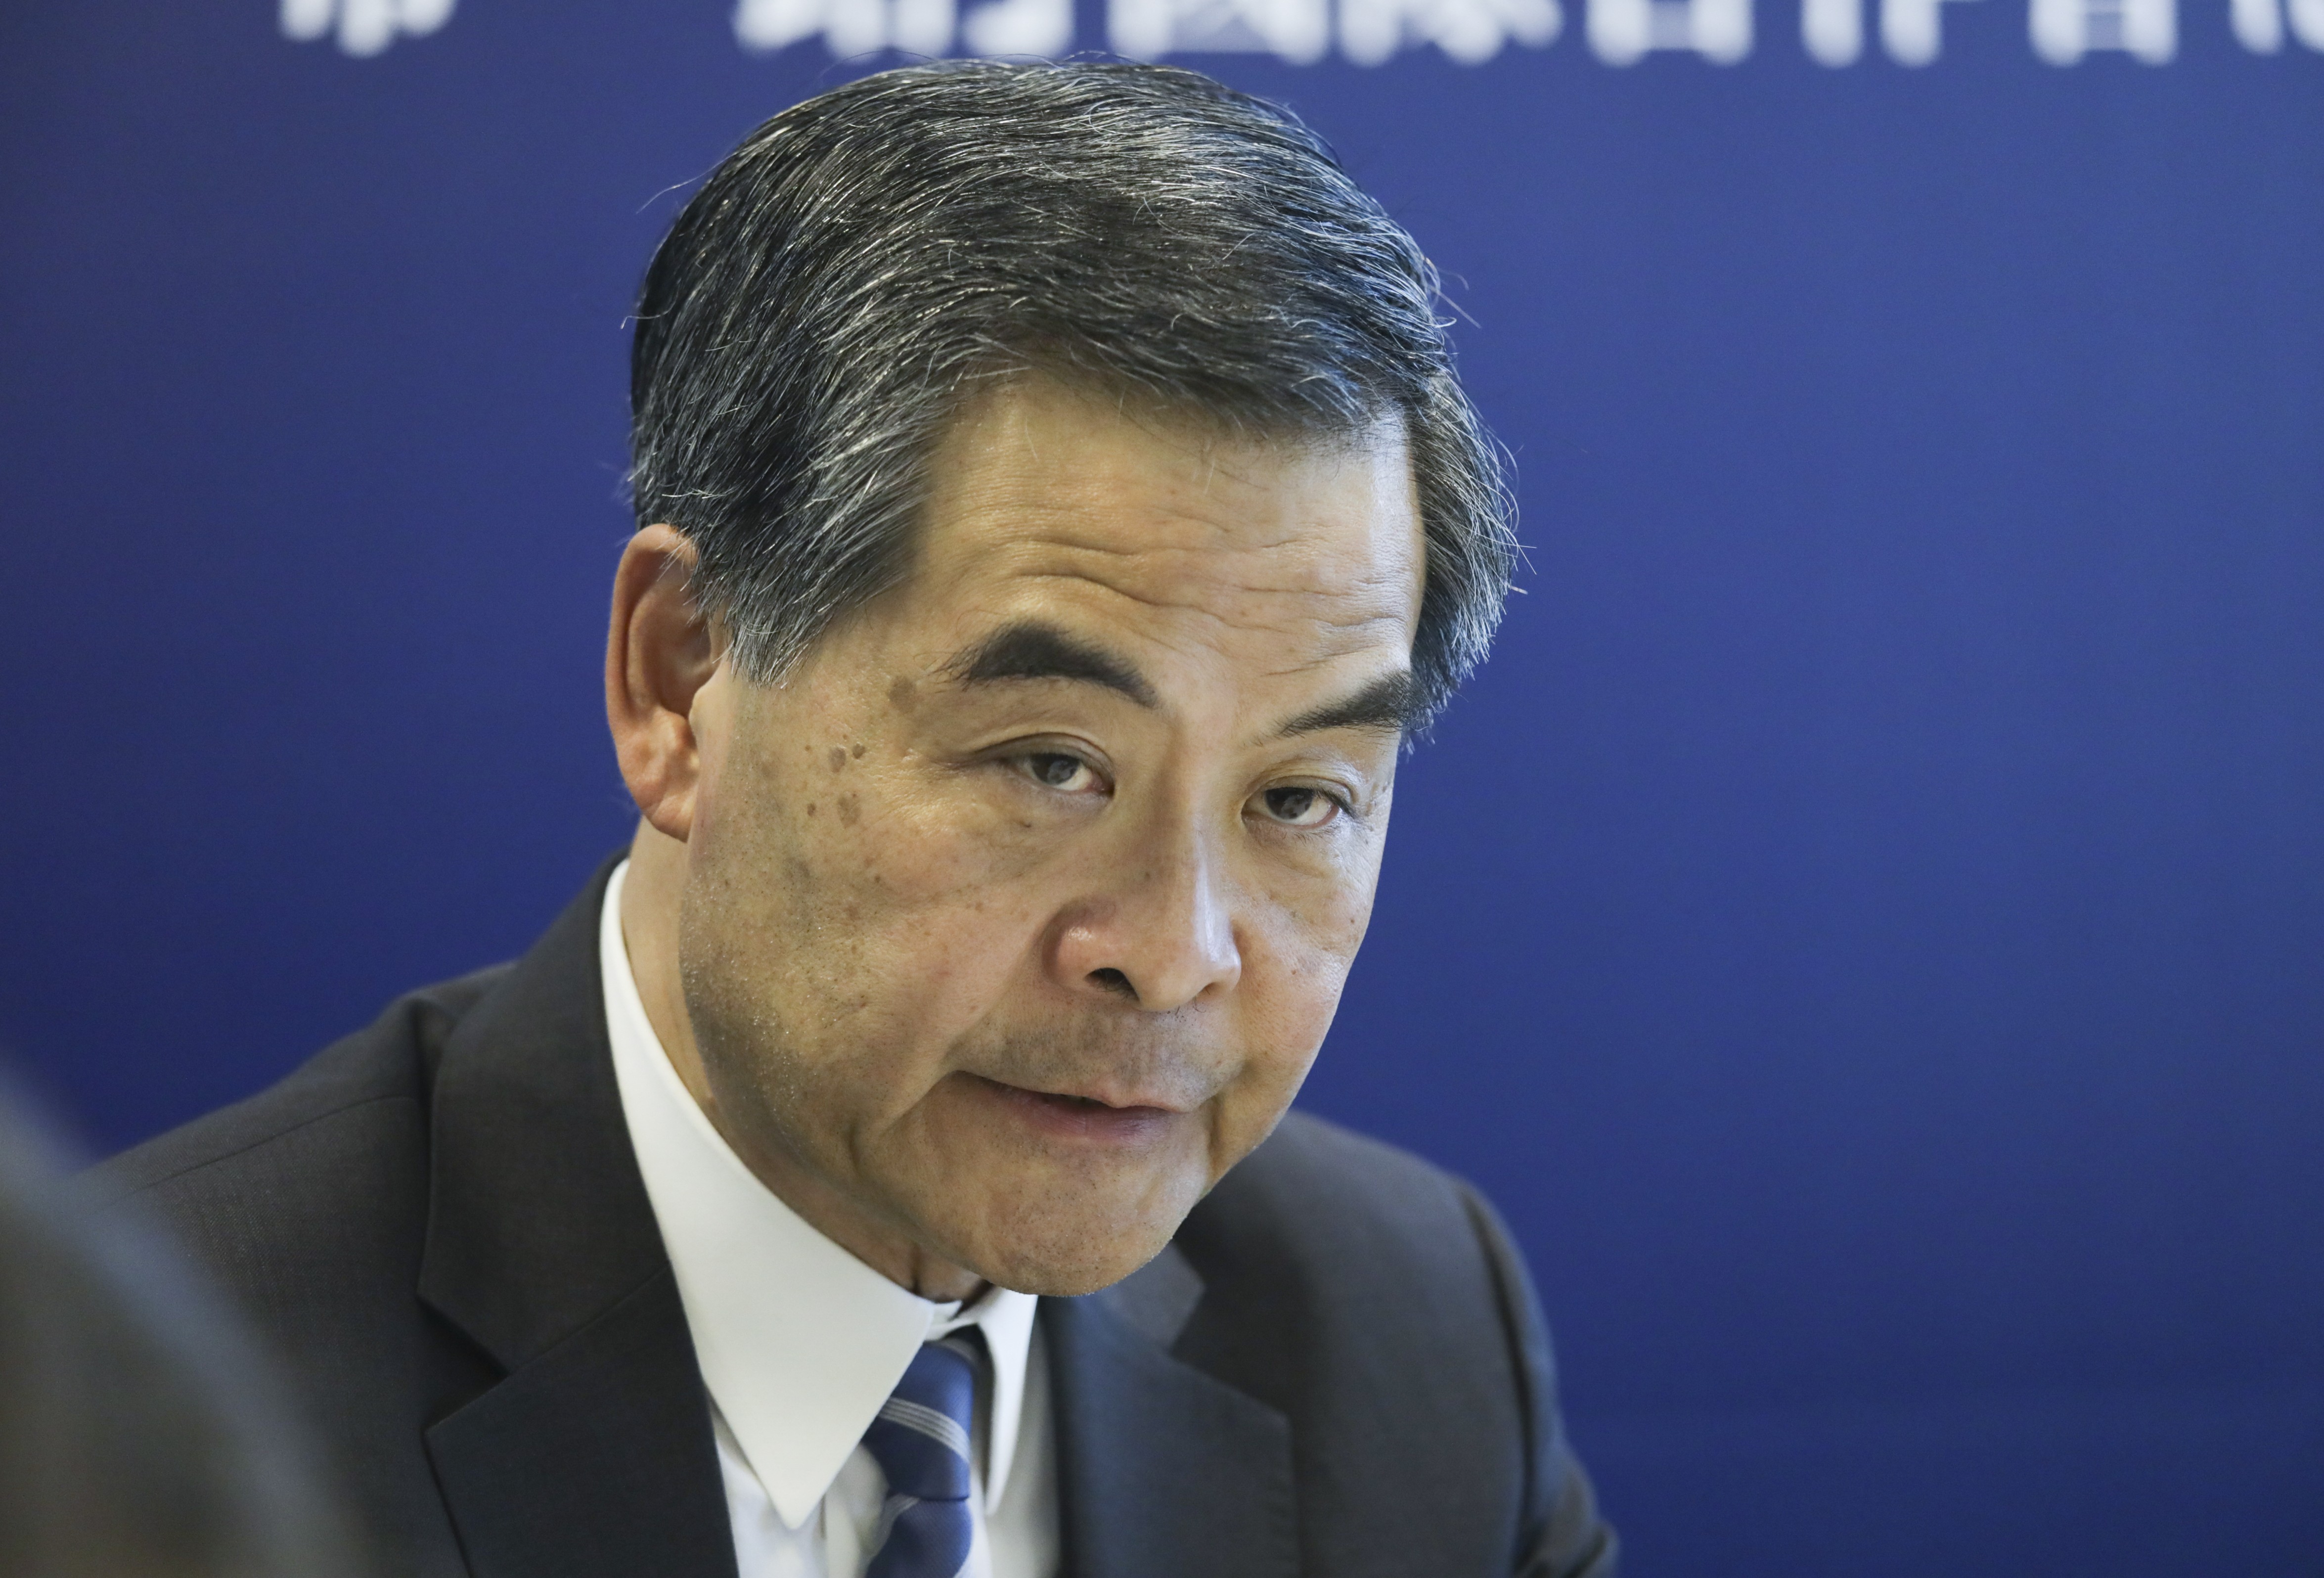 Former chief executive Leung Chun-ying received part of a HK$50 million payment from Australian firm UGL while in office but failed to declare the payment. Photo: Tory Ho